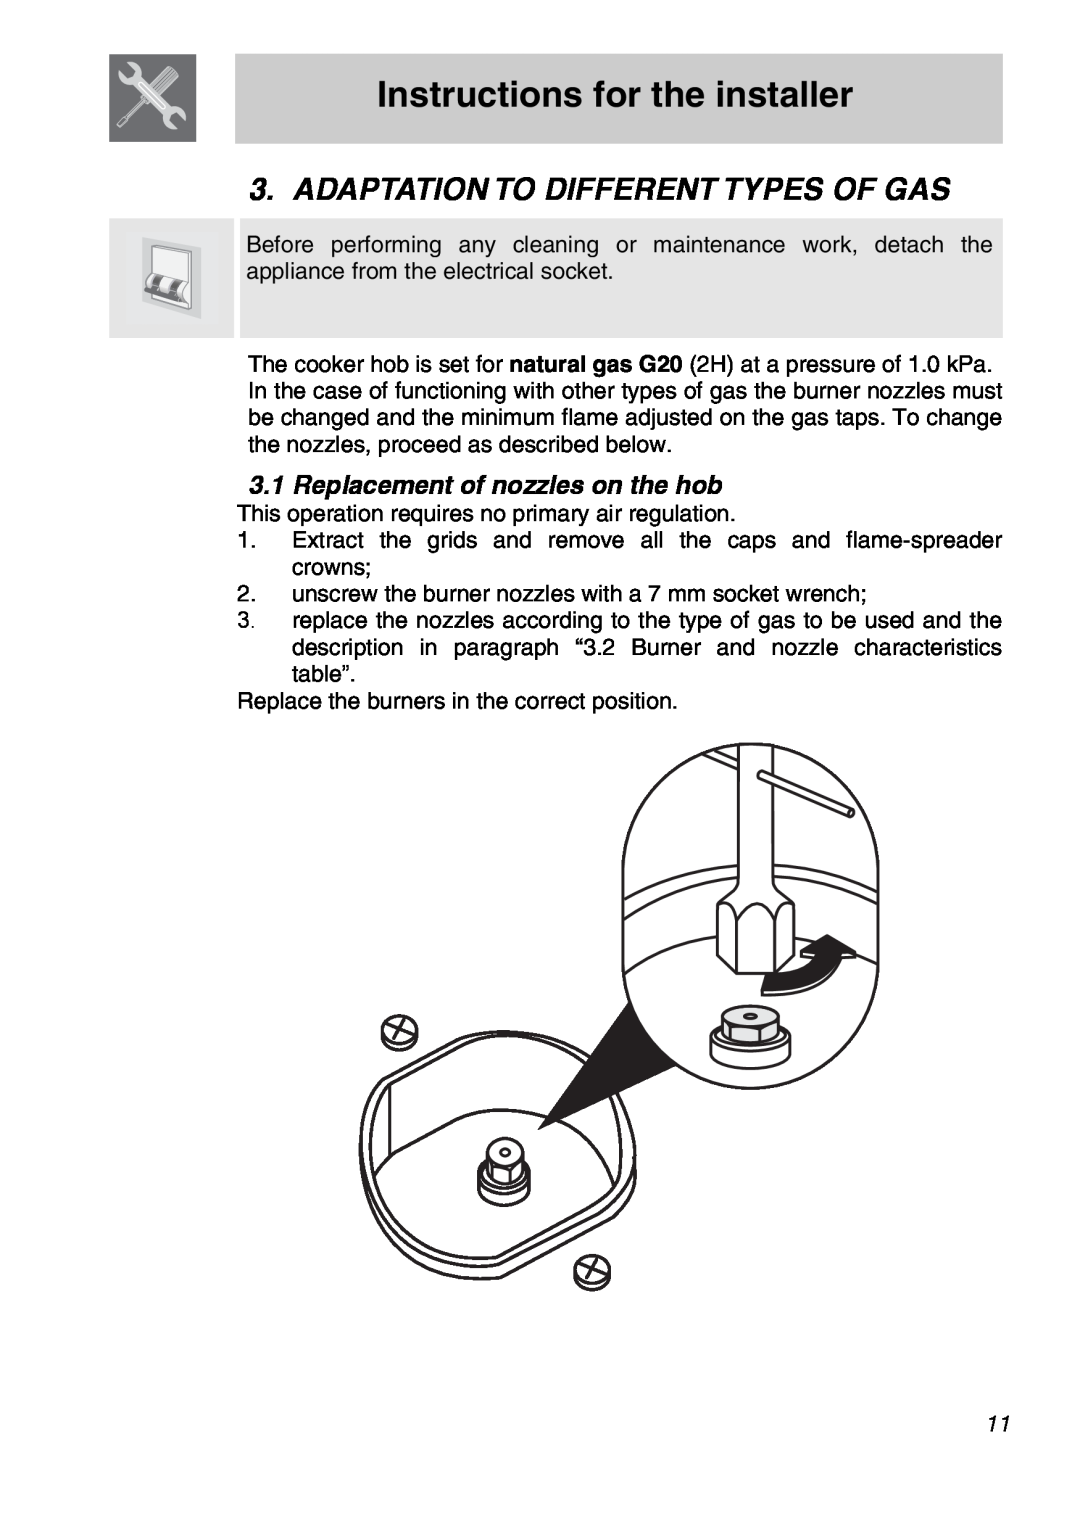 Smeg A21X-6 Adaptation To Different Types Of Gas, 3.1Replacement of nozzles on the hob, Instructions for the installer 